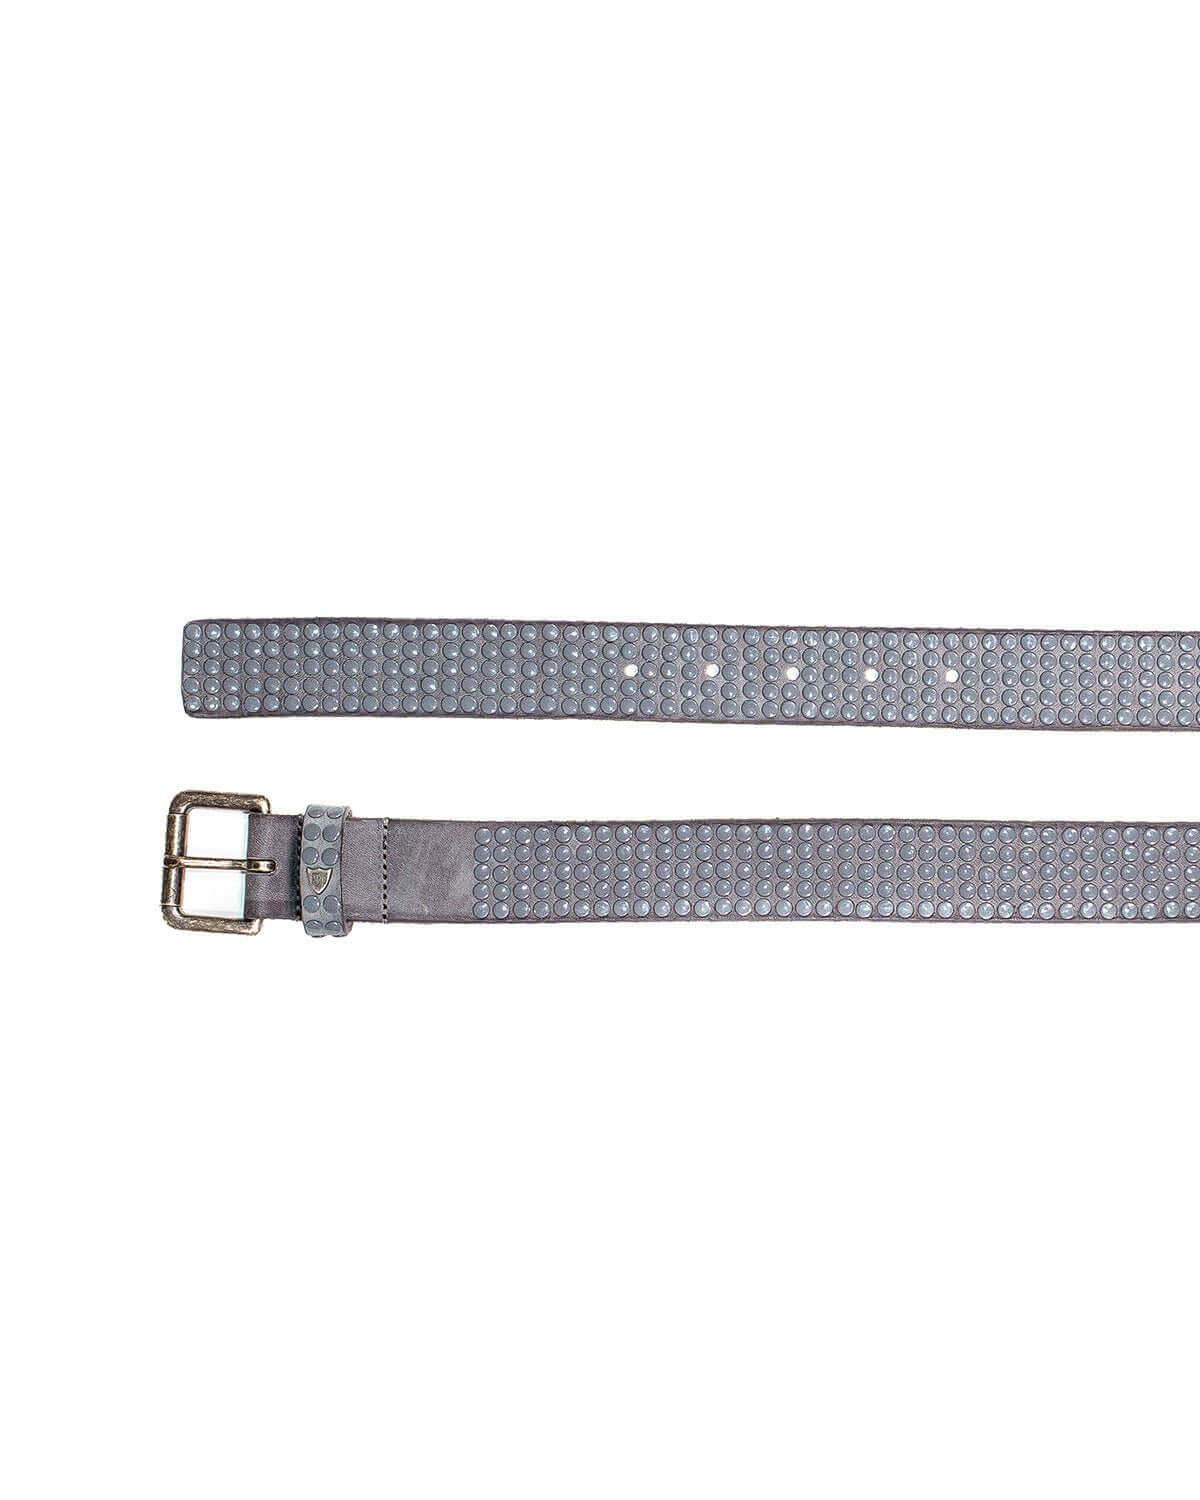 5.000 STUDS COLOR BLOCK BELT Leather belt with varnish studs, brass buckle, studded zamac belt loop with HTC logo rivet. Height: 3,5 cm. Made in Italy. HTC LOS ANGELES